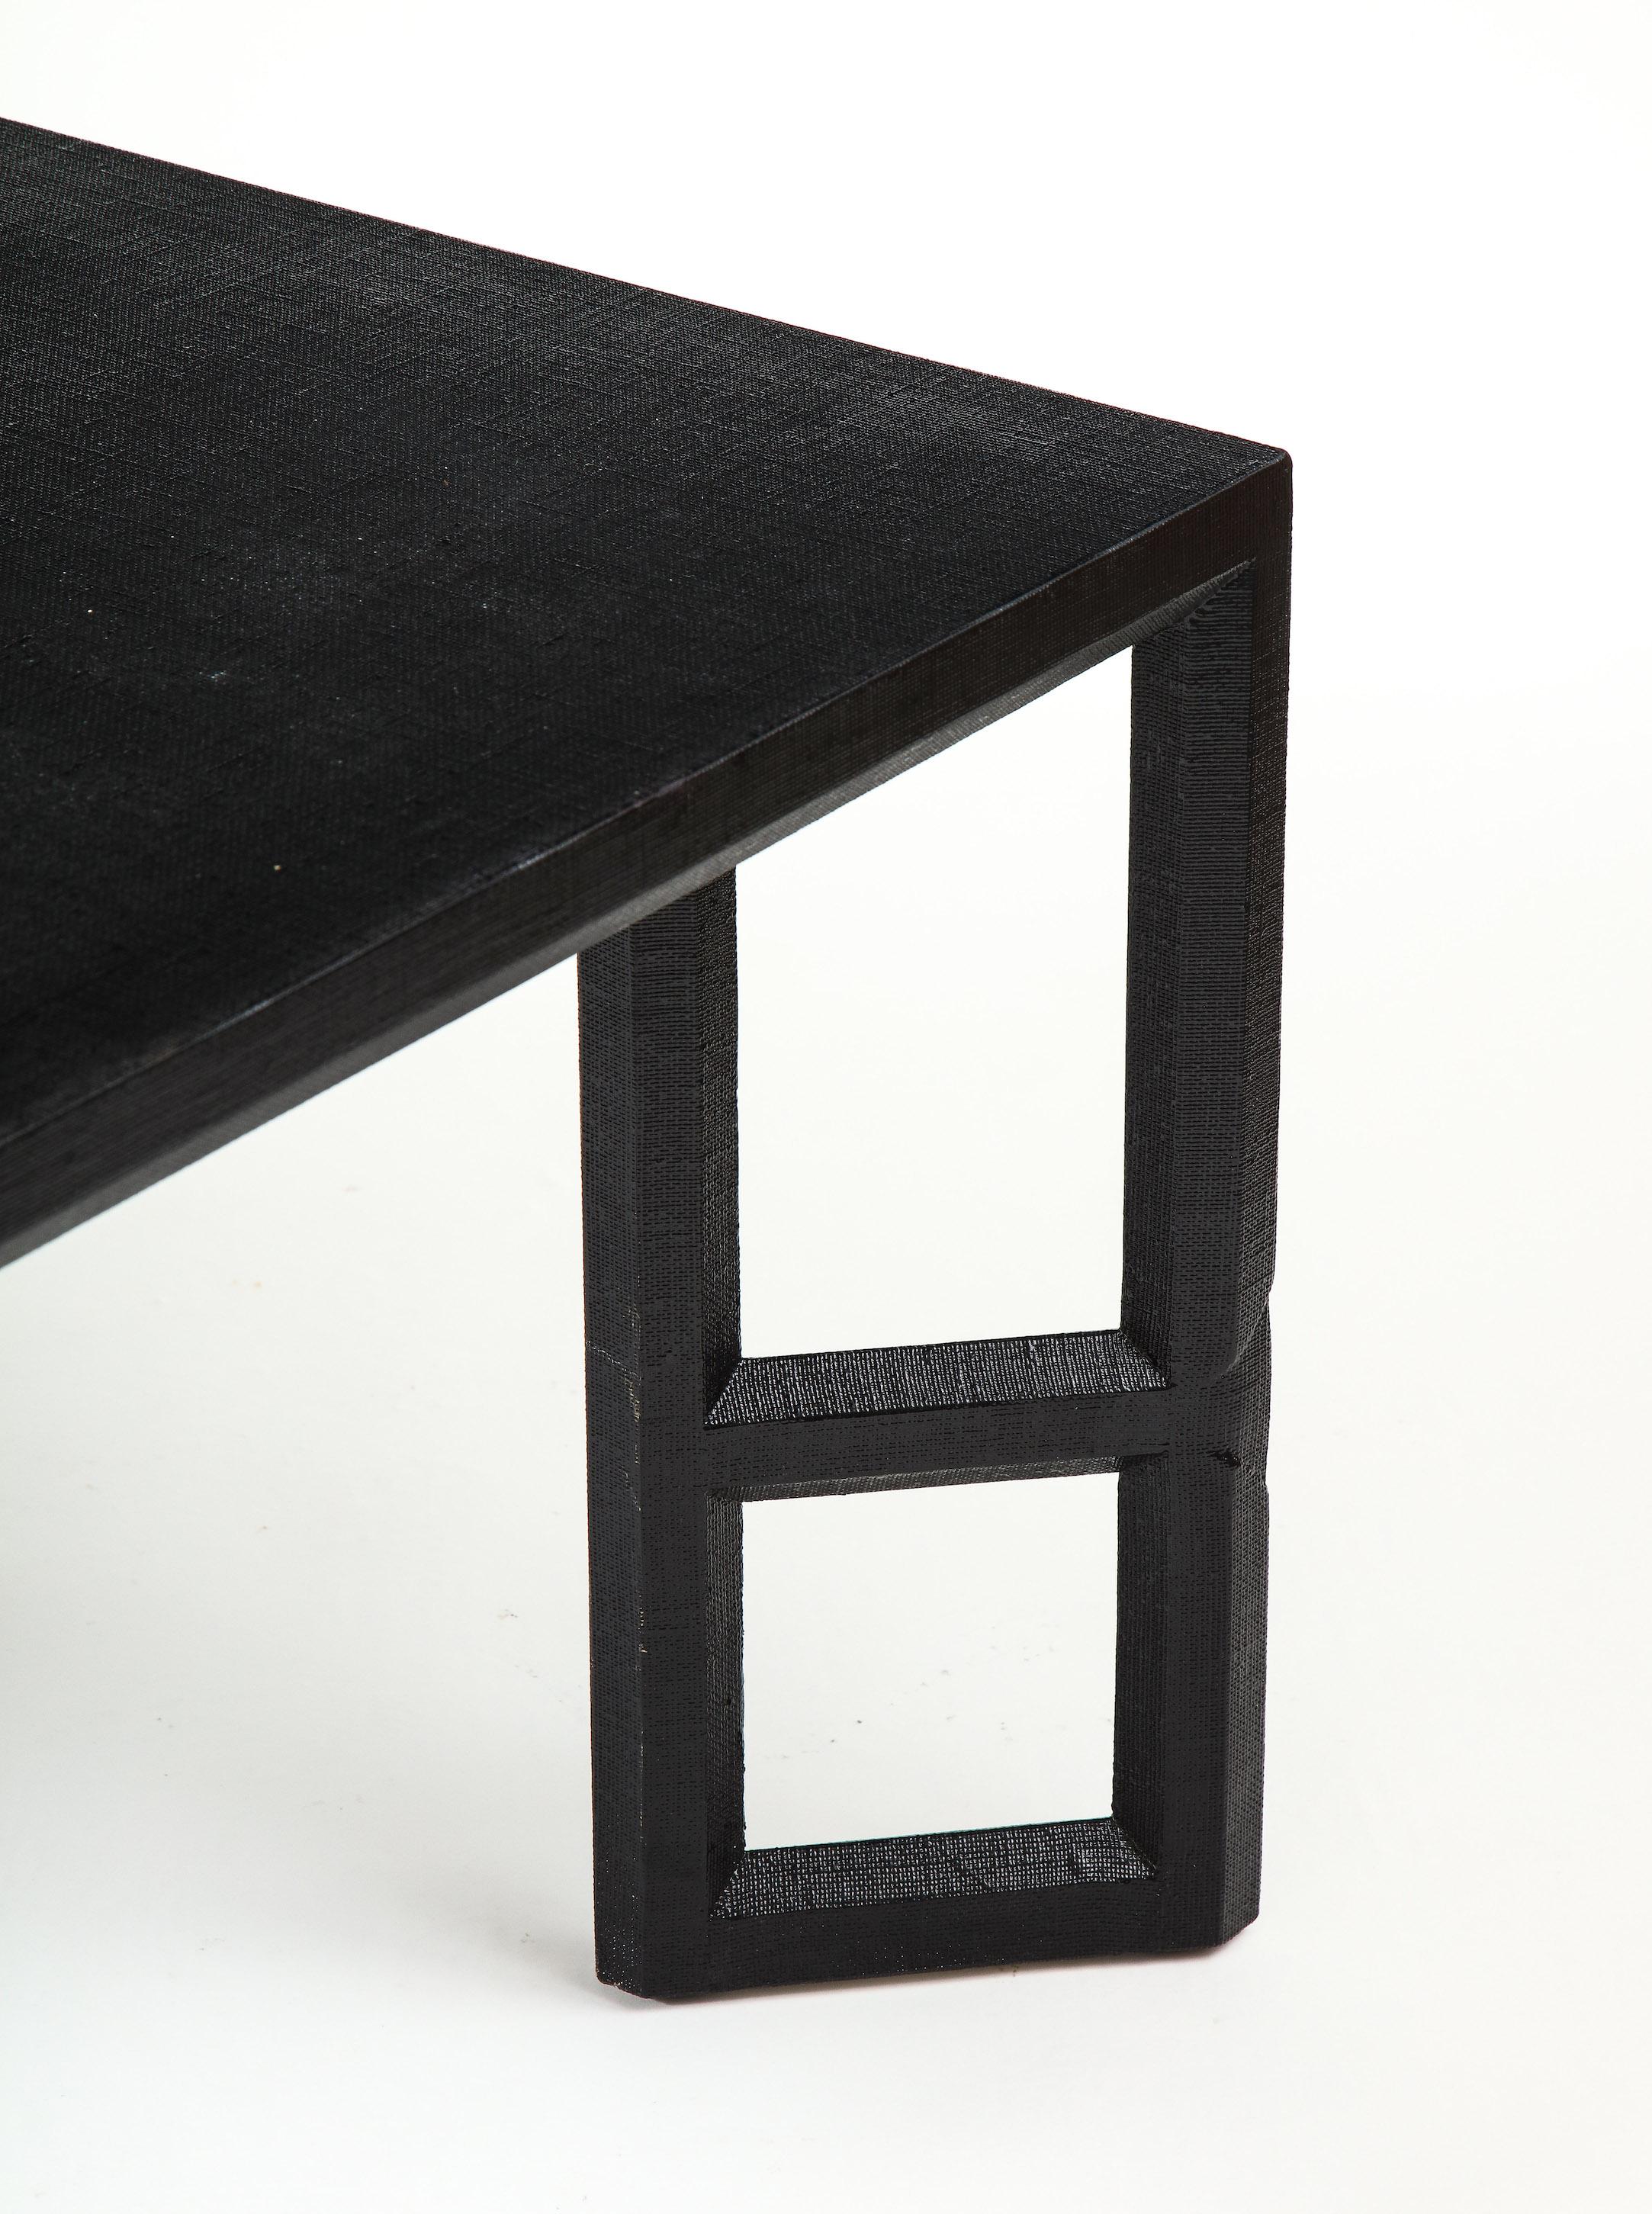 American Midcentury Black Linen-Wrapped Coffee Table